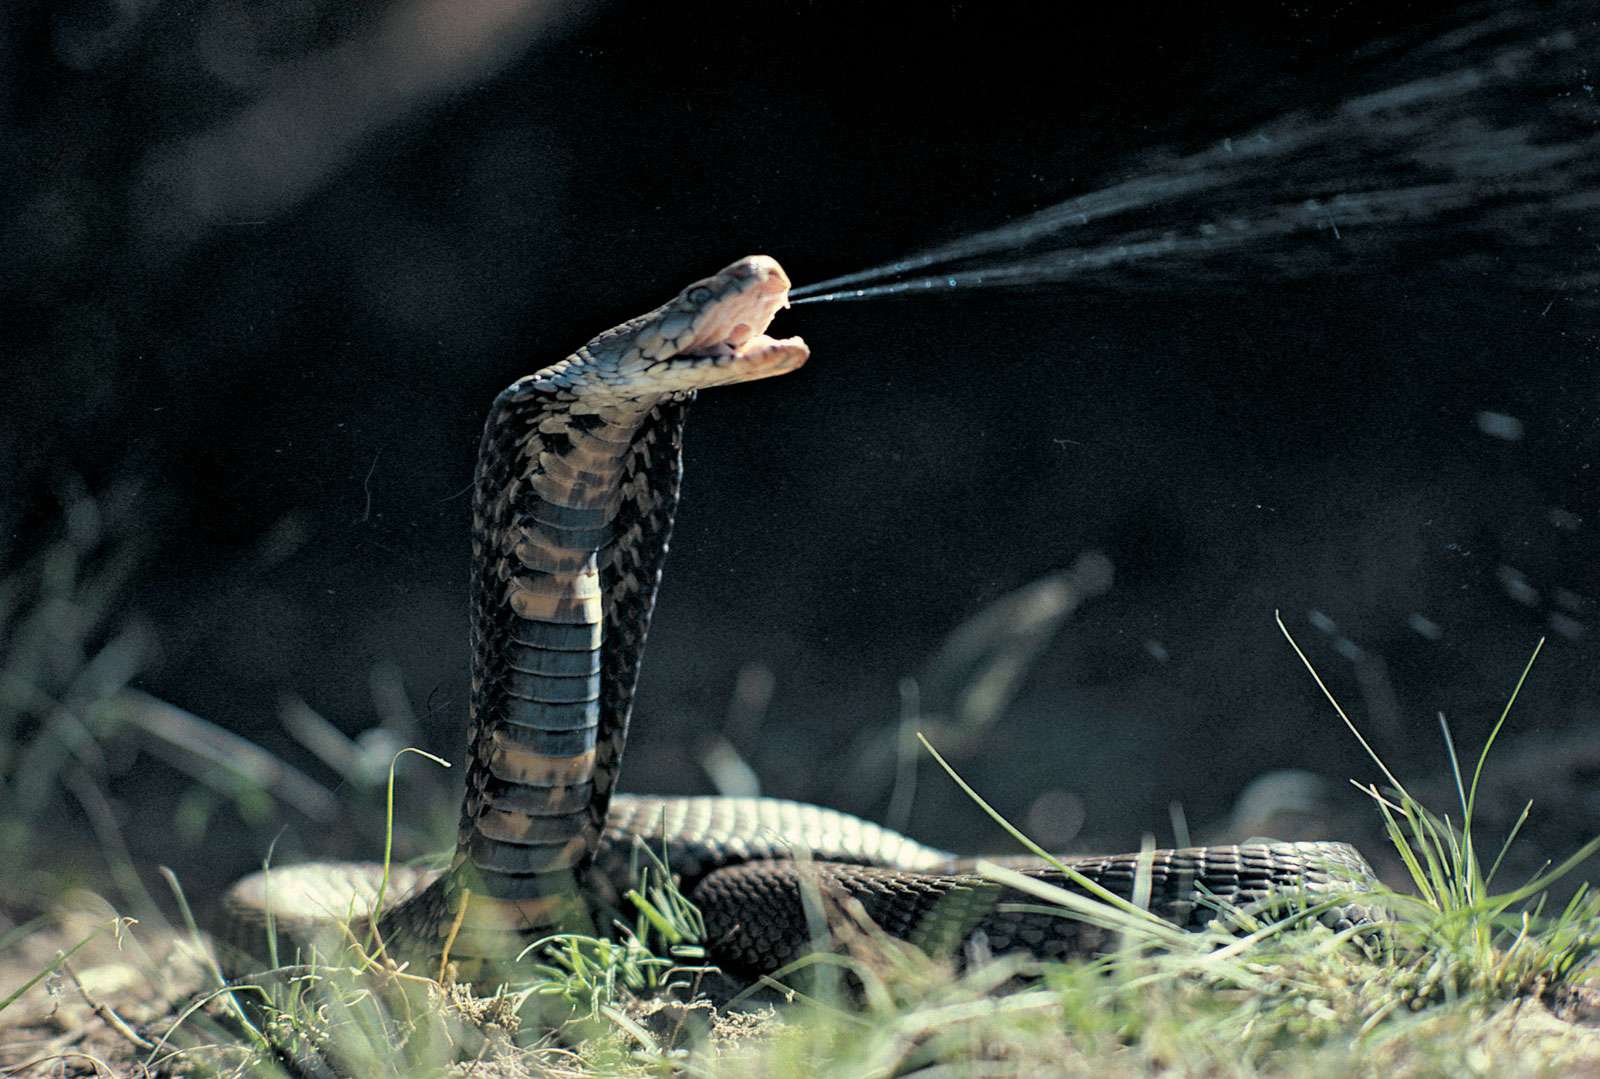 What are the most poisonous snakes in the world?